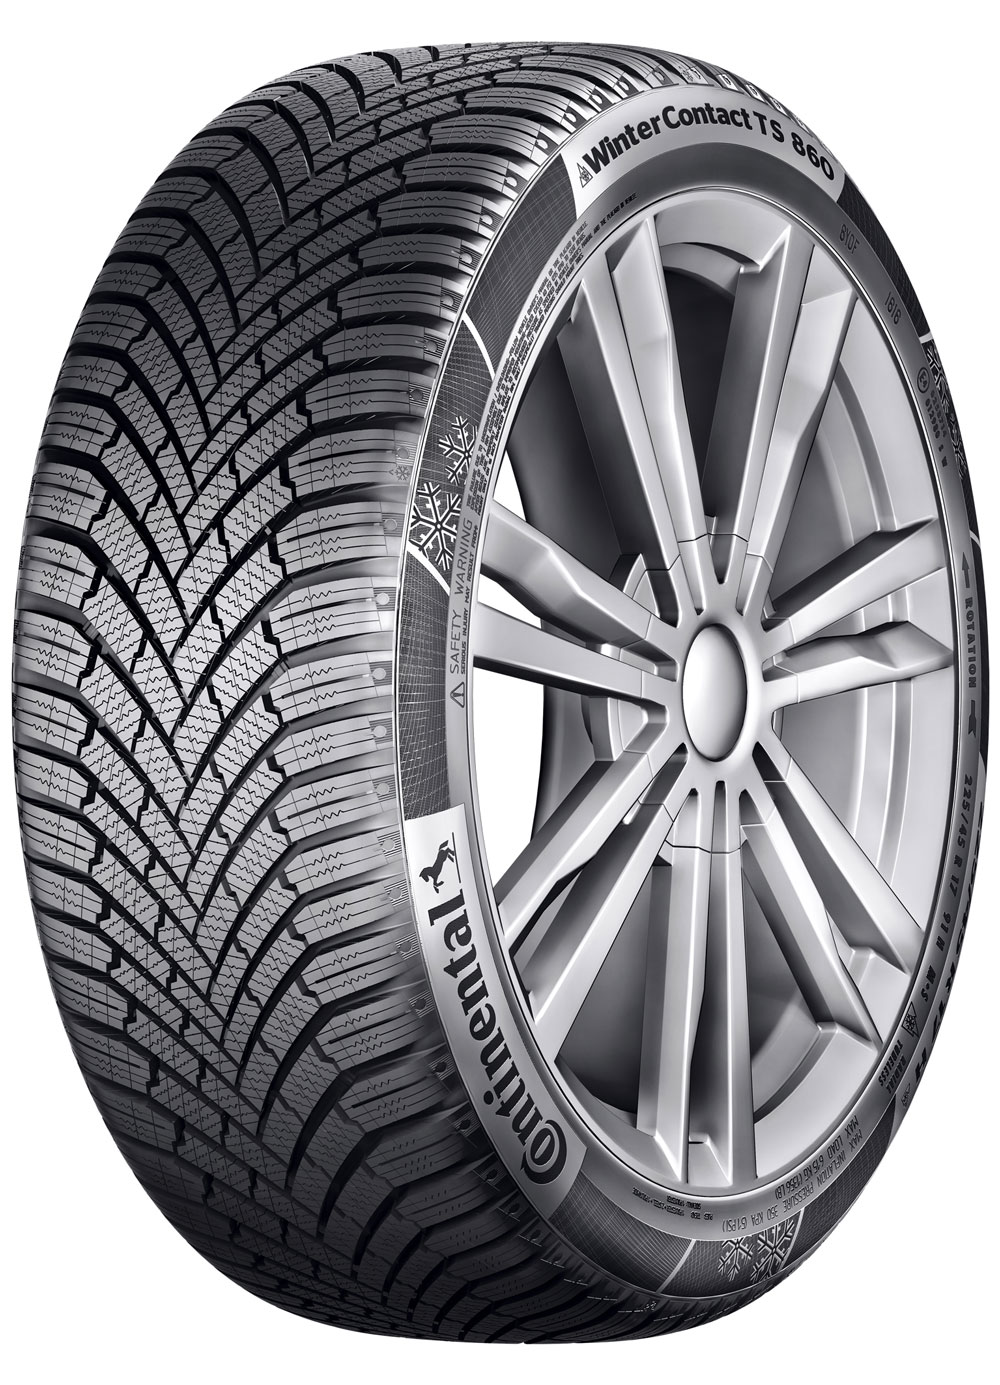 Gomme Nuove Continental 205/65 R15 94H WinterContact TS 870 M+S pneumatici nuovi Invernale